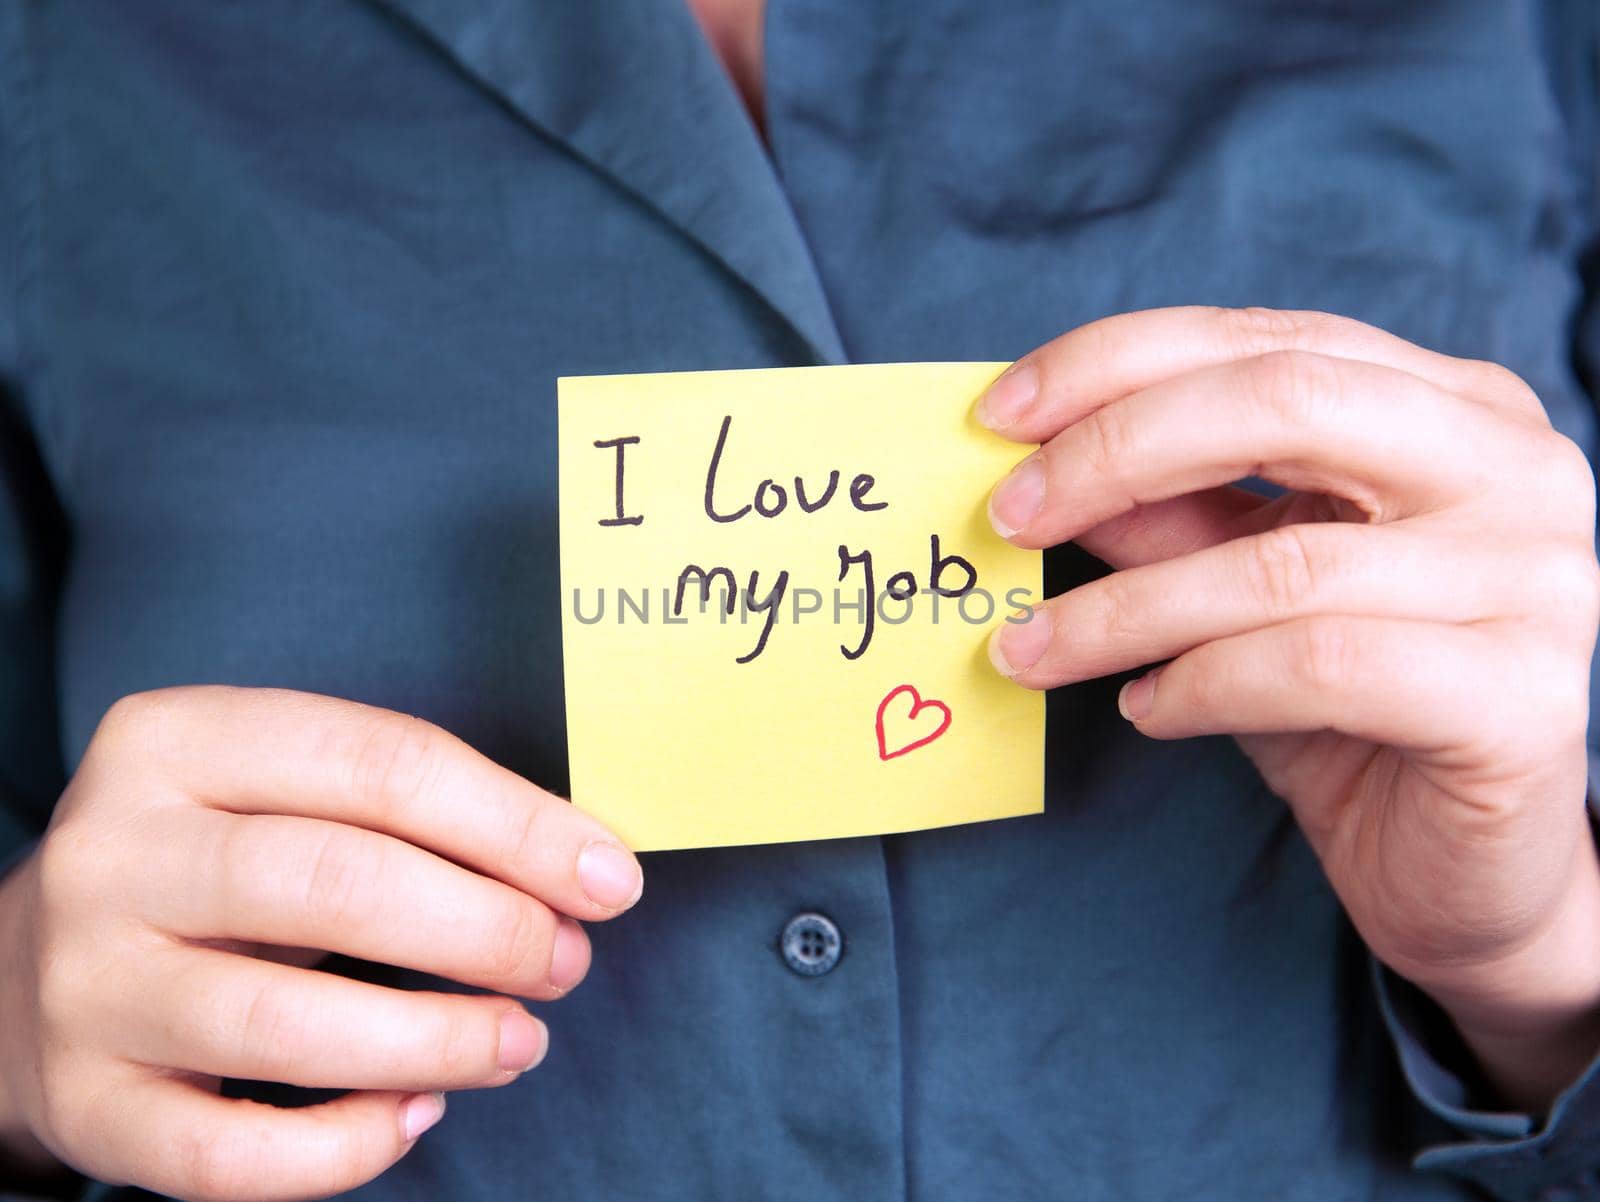 I Love My Job Note in hand, business woman or man with yellow sticky note with positive achievement, business,goals,education,people concept close up